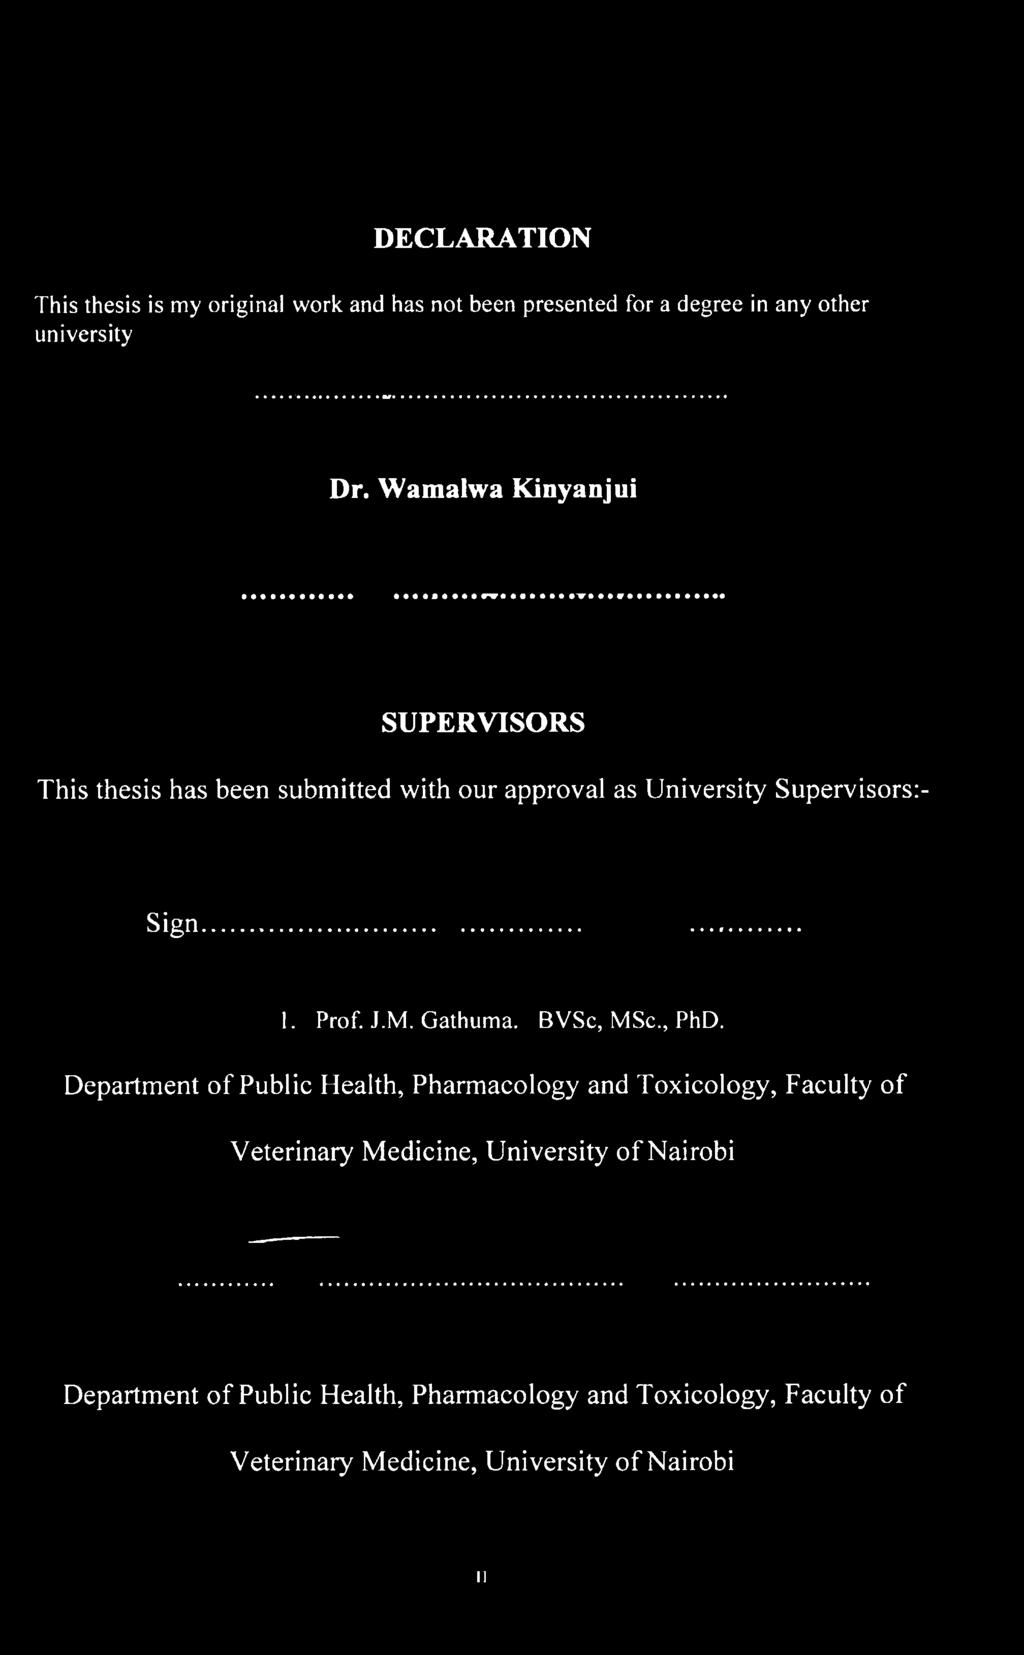 W amalwa Kinyanjui SUPERVISORS This thesis has been submitted